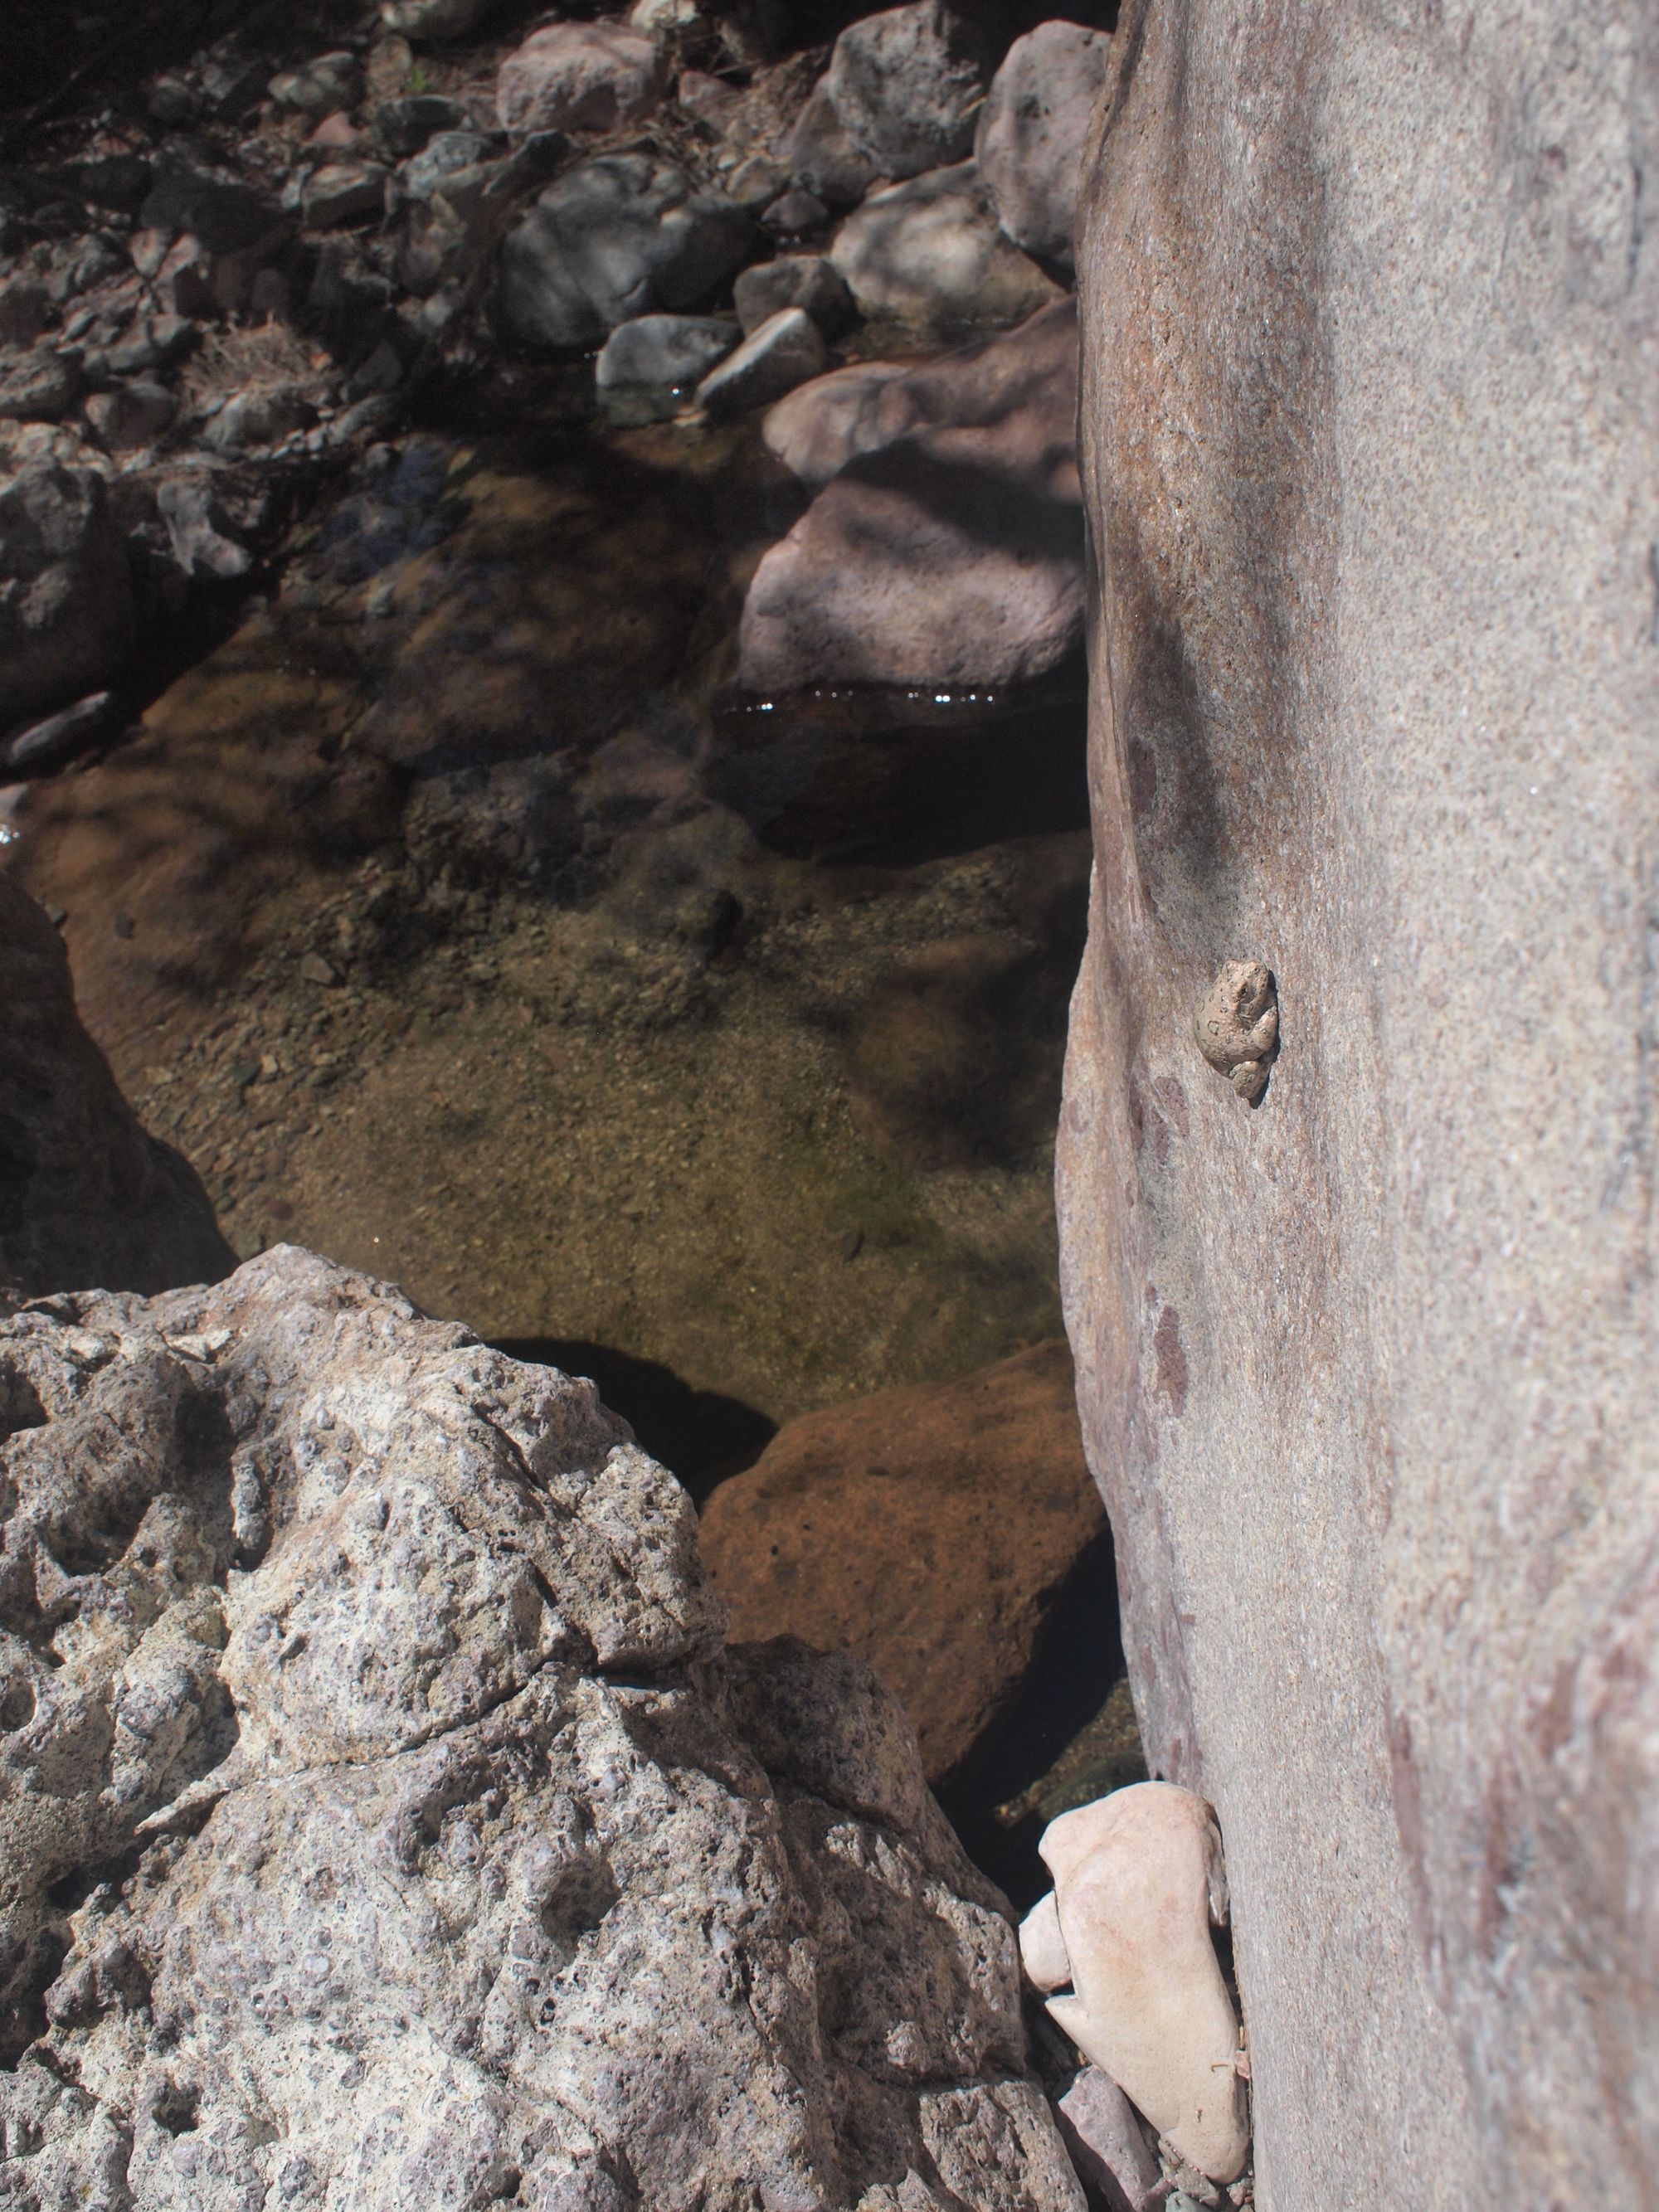 A small tan, well camouflaged frog clings to a rock by a creek